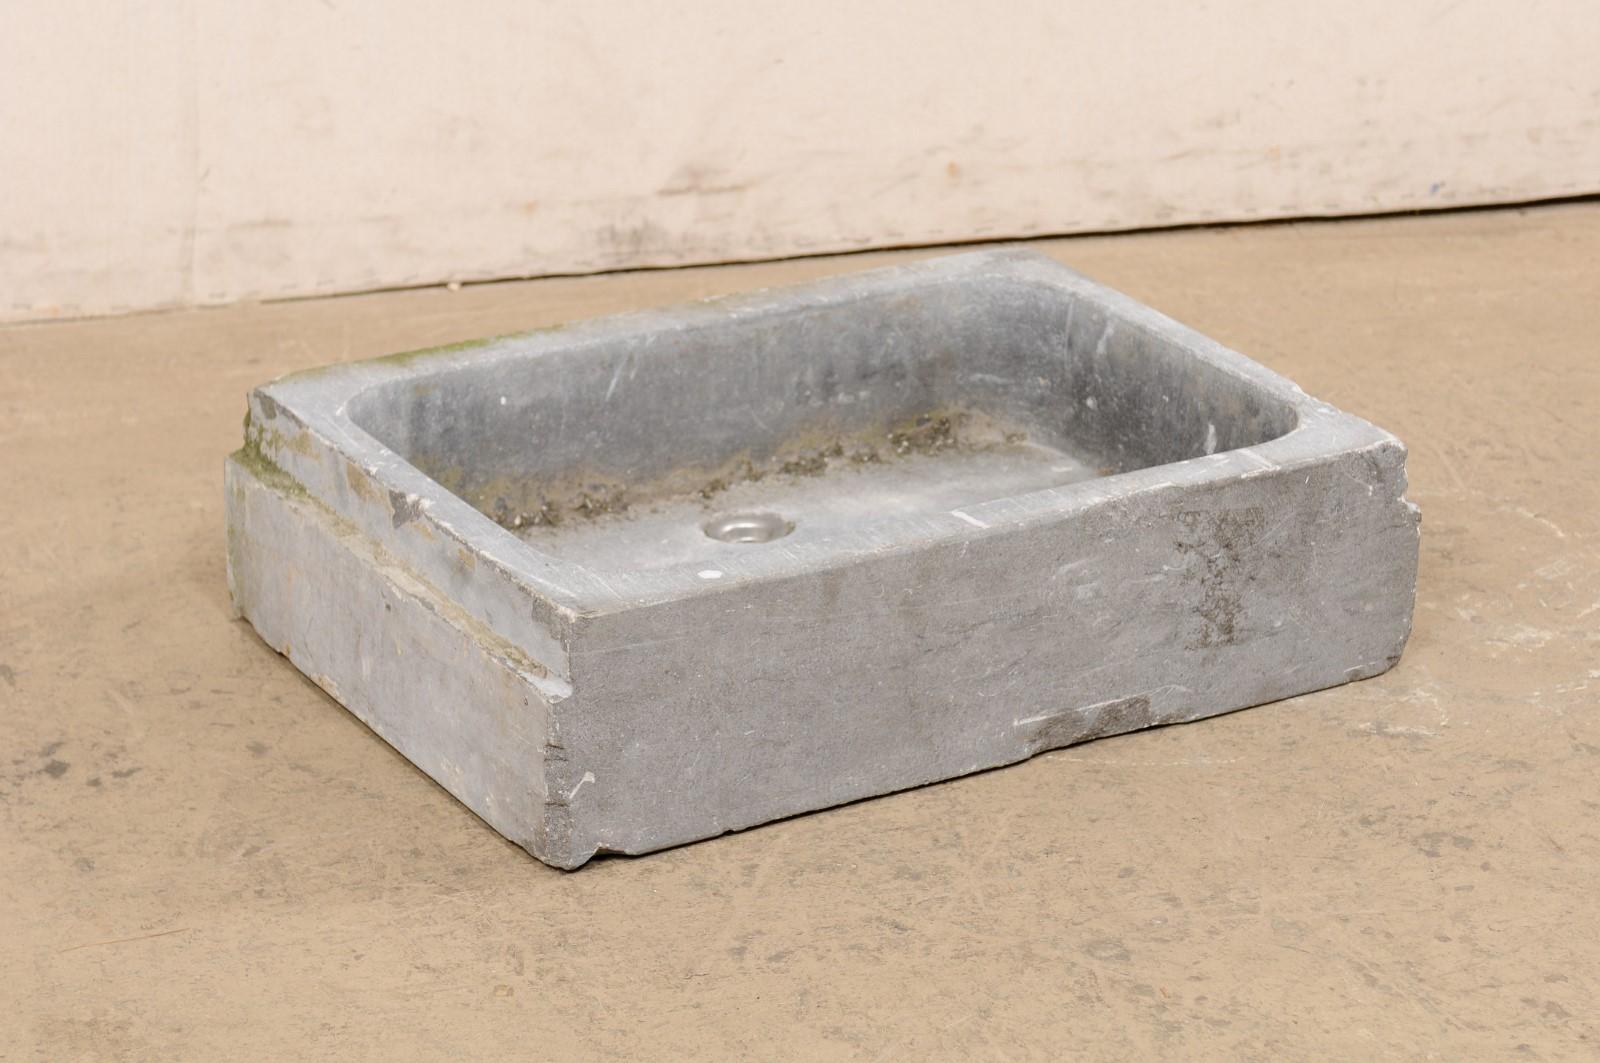 A Spanish carved-stone sink, with shallow basin, from the early 20th century. This antique hand-carved bluestone sink from Spain has an overall rectangular-shape, which houses a shallow, 5